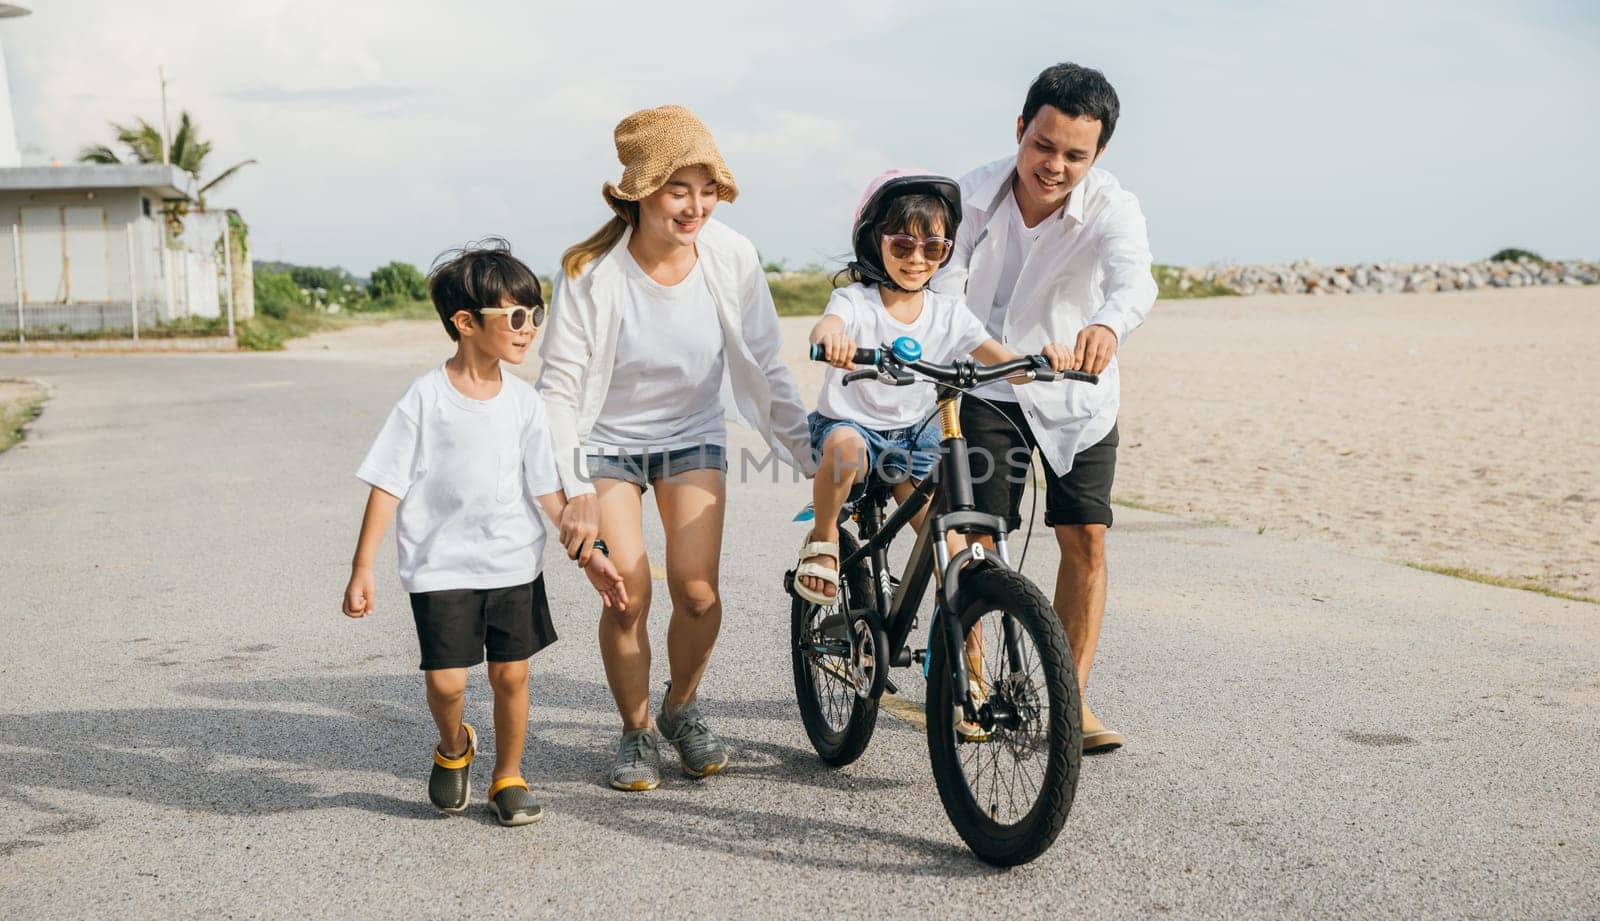 Summer fun by sea, Happy parents guide their children in learning to ride bicycles on a sandy beach. Smiles safety helmets and freedom of cycling characterize this cheerful tourism day concept. by Sorapop